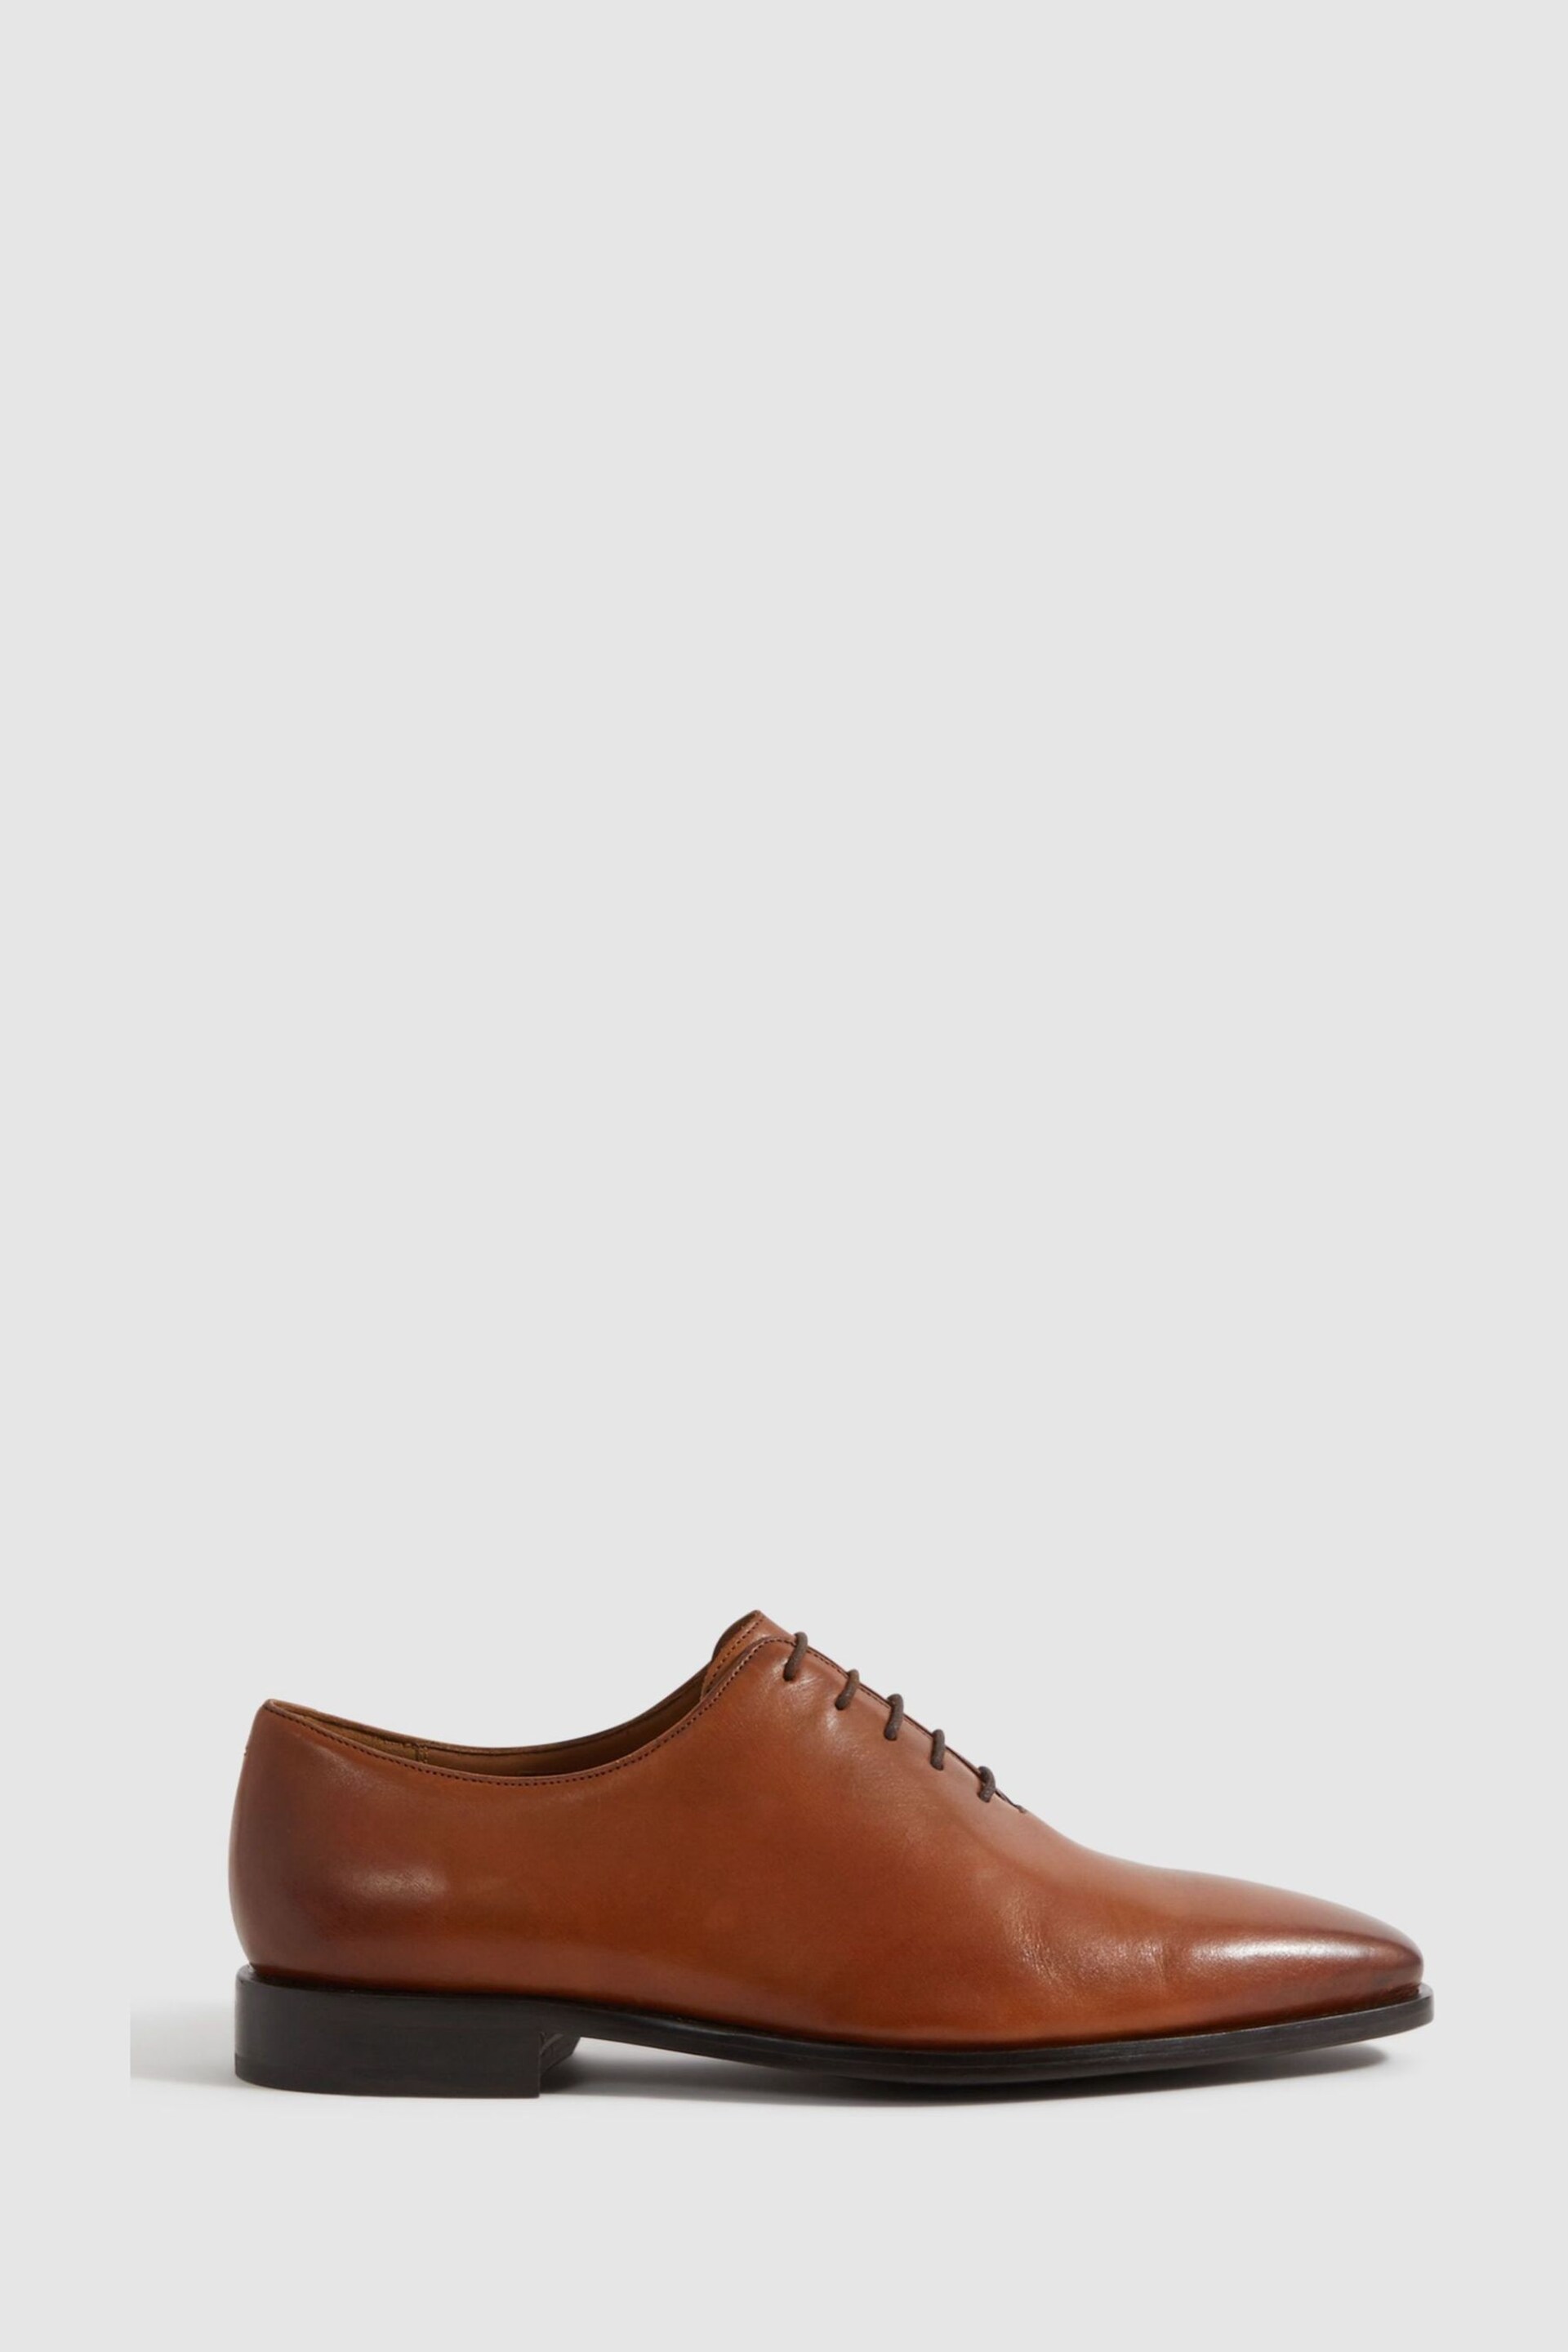 Reiss Light Tan Mead Leather Lace-Up Shoes - Image 1 of 5